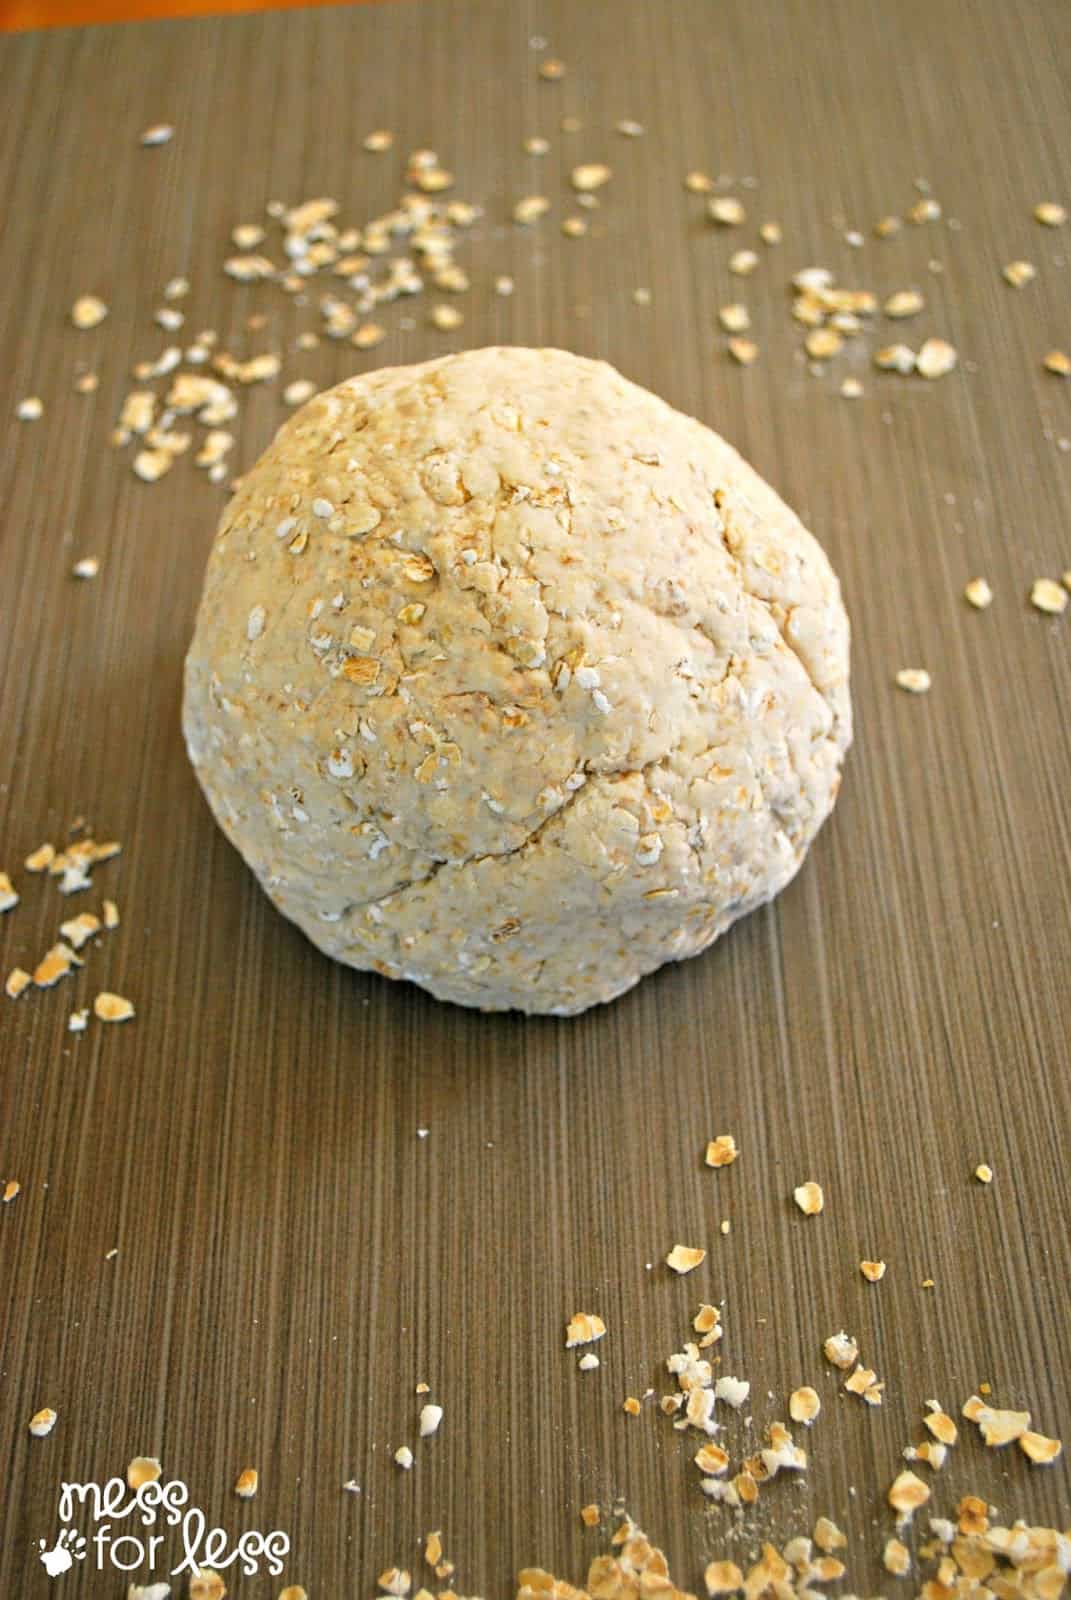 Oatmeal Playdough Recipe - Just 3 Ingredients to make this edible dough. So simple to make with kids!